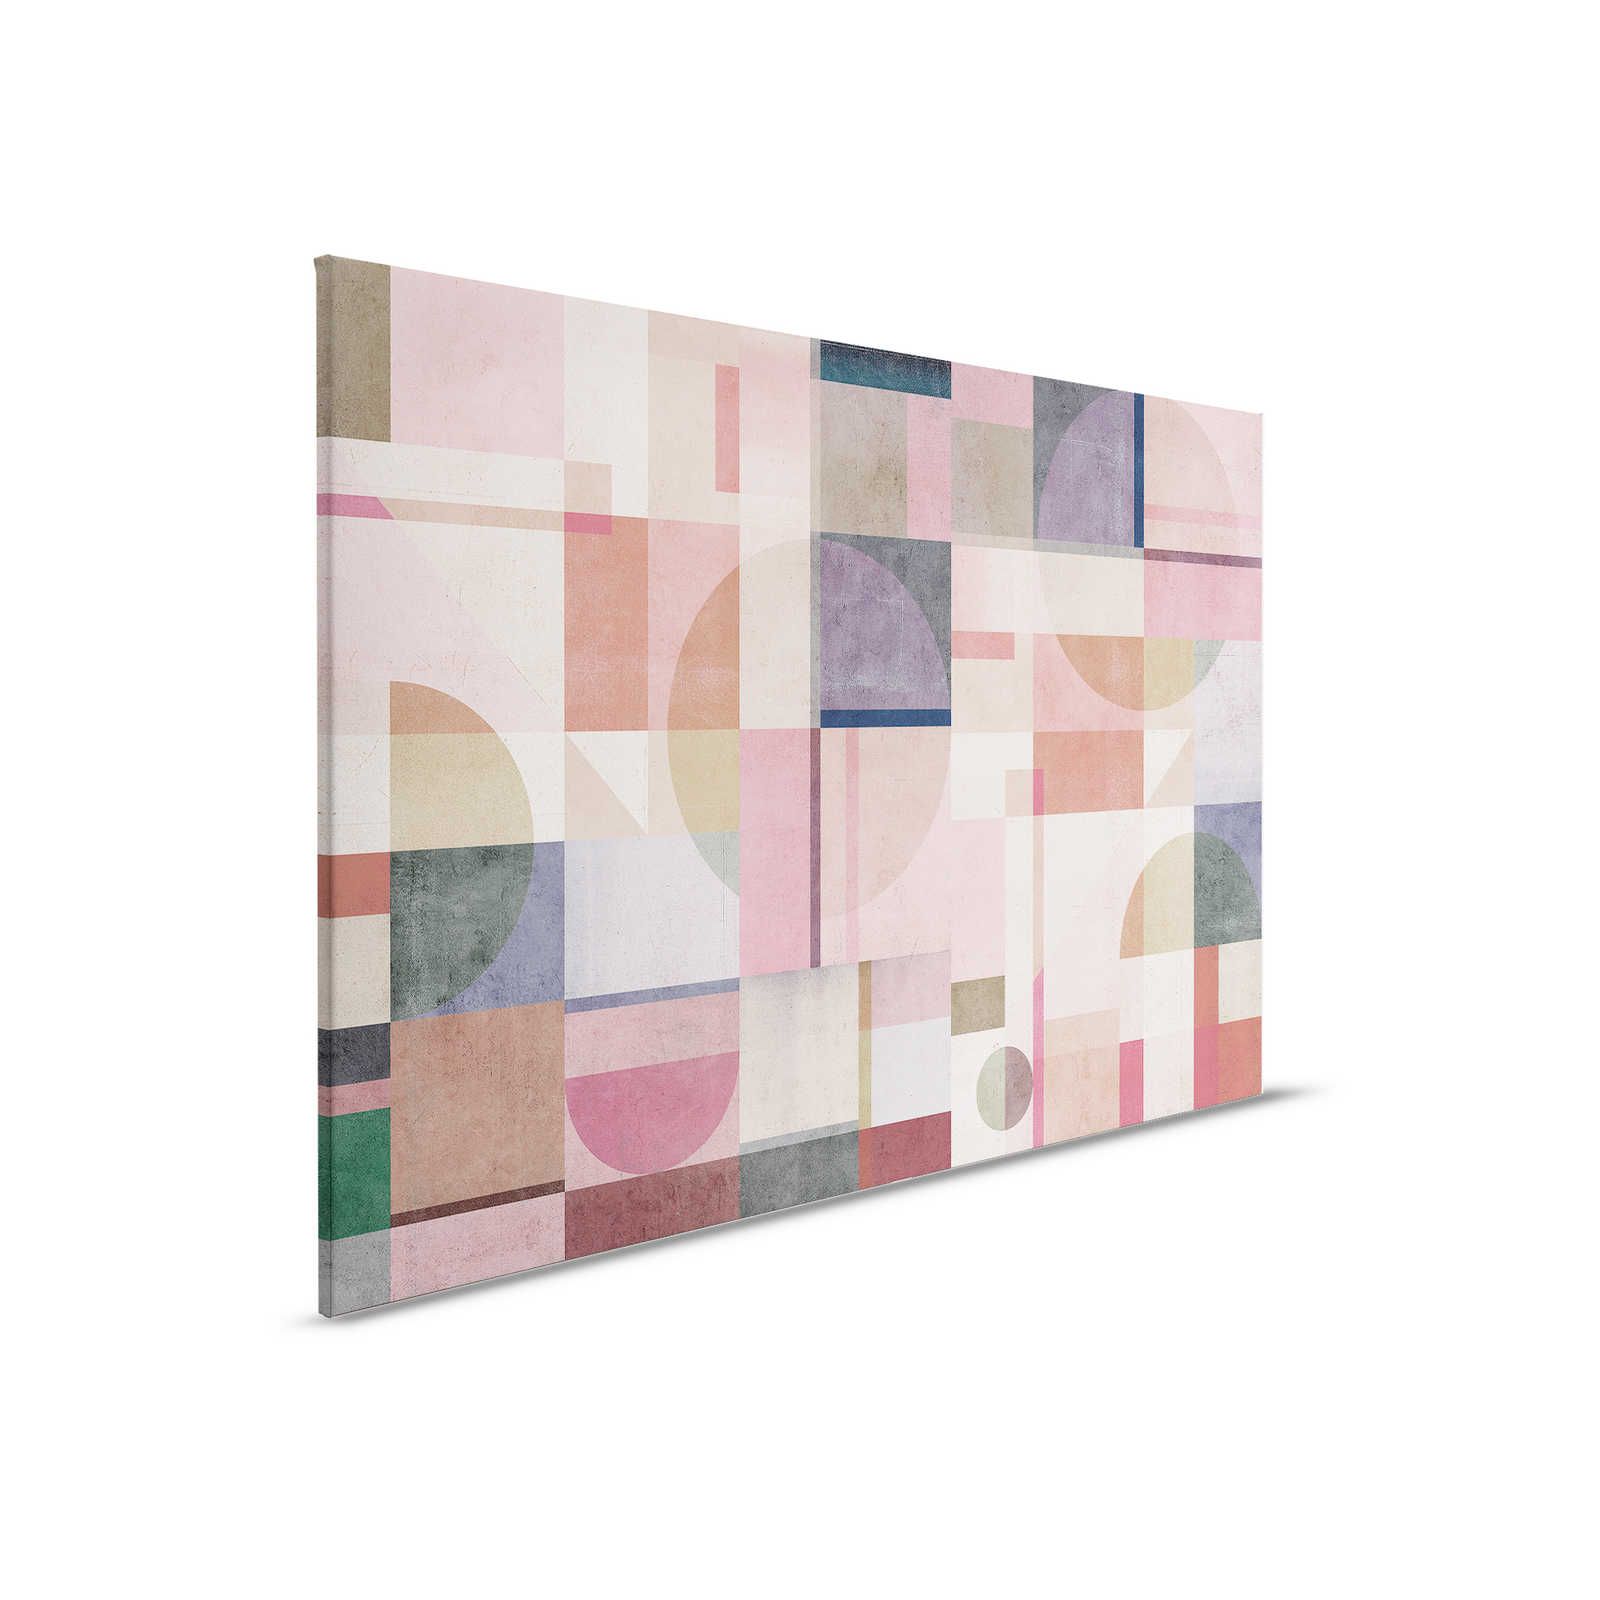         Piazza 2 - Concrete Look Canvas Painting Pink & Green with Graphic Pattern - 0.90 m x 0.60 m
    